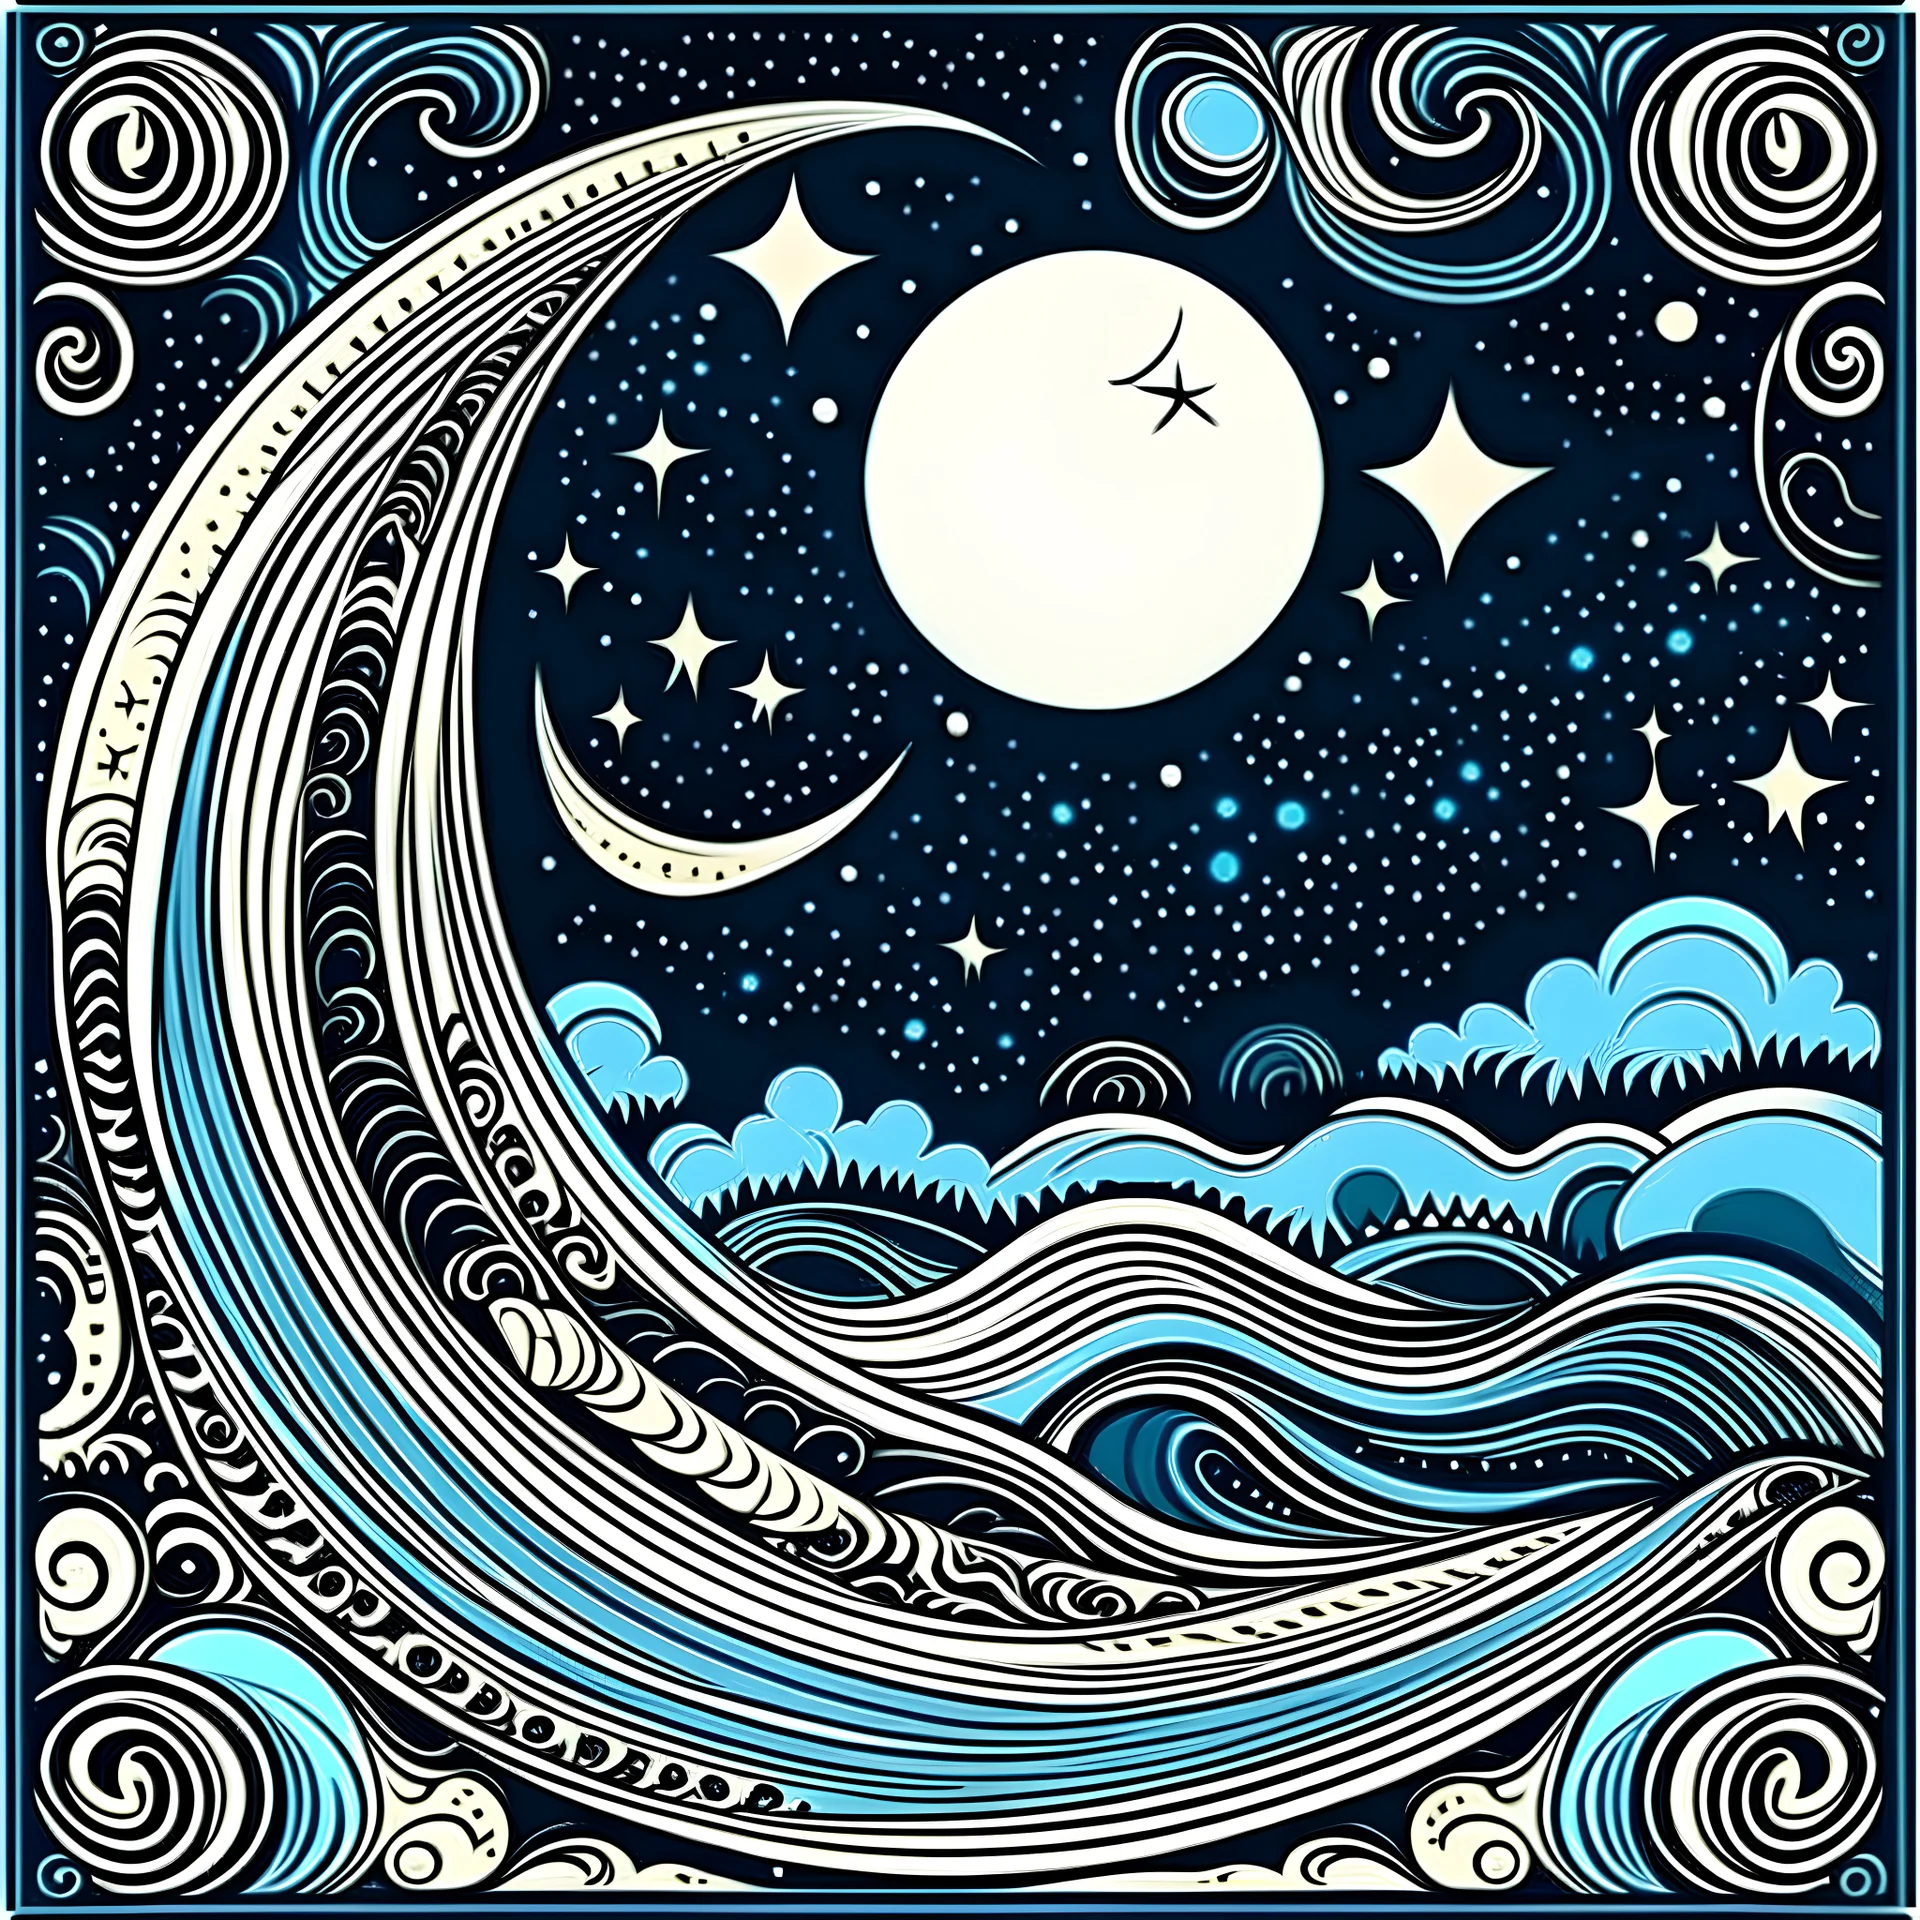 design with thick border moons in corner blue tones moon stars waves in night sky style of art deco